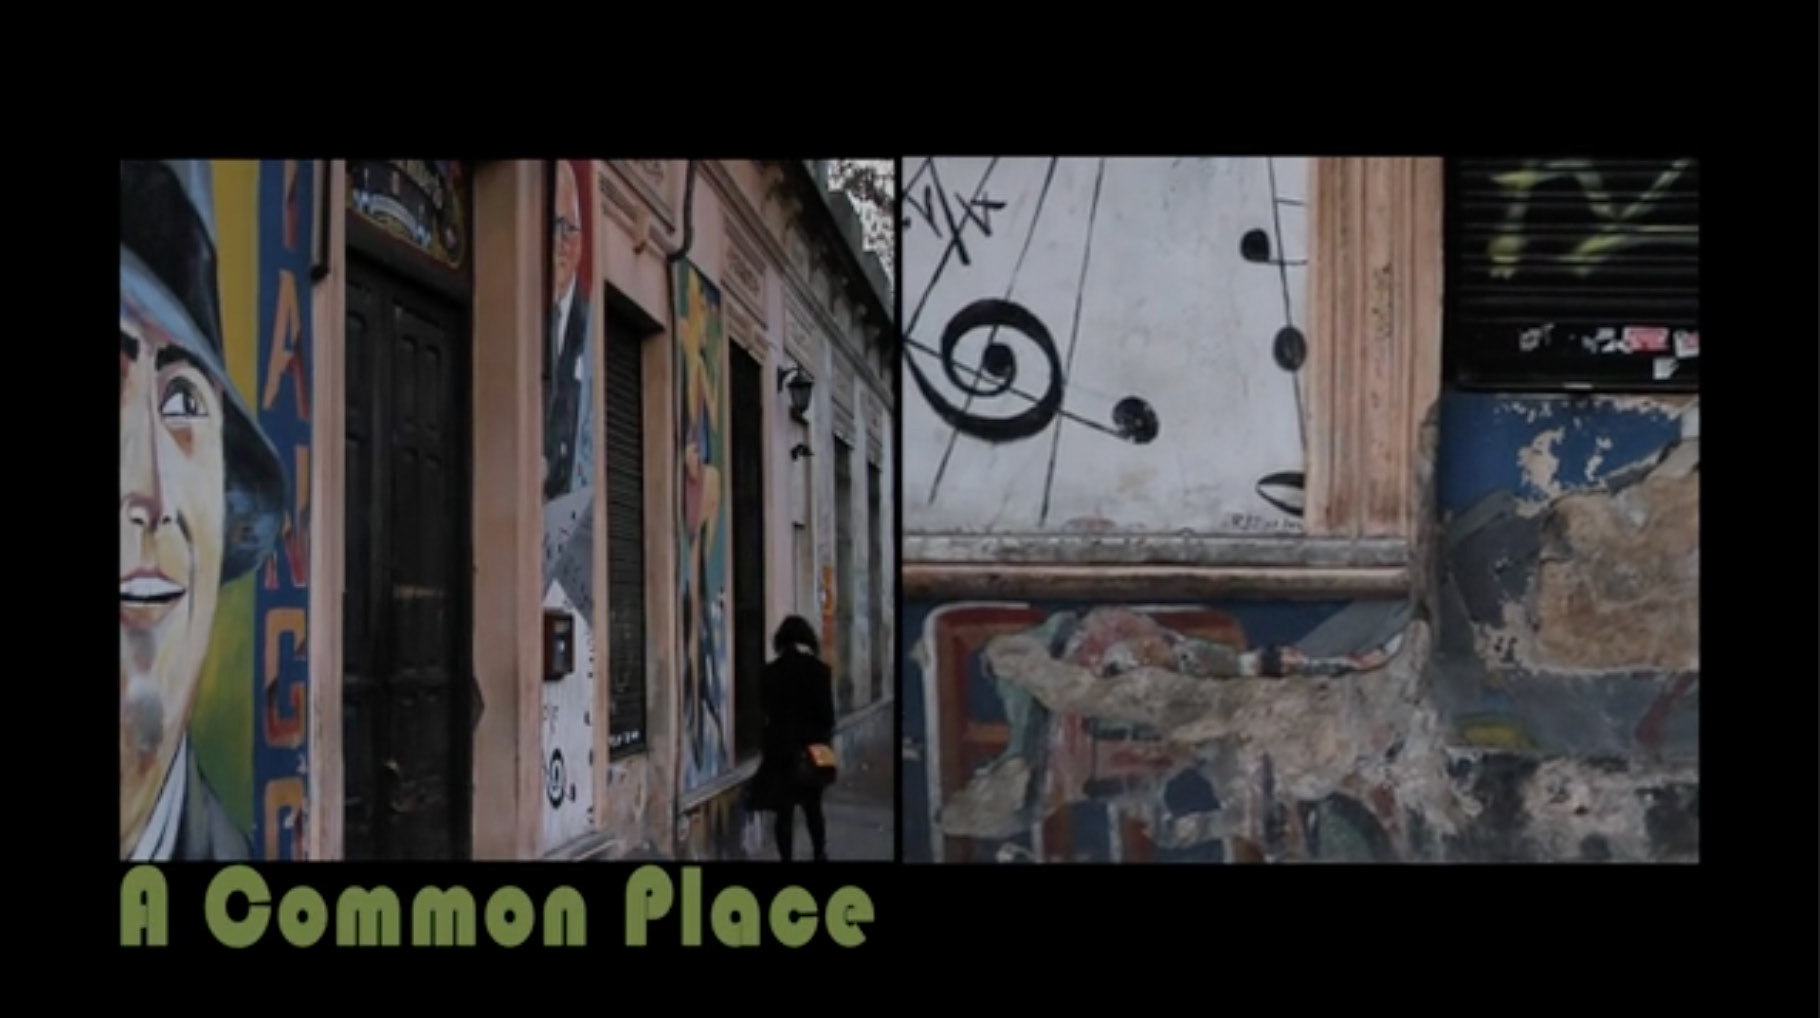 Screenshot From A Common Place Showing The Outside Of “el Boliche De Roberto” In The Almagro